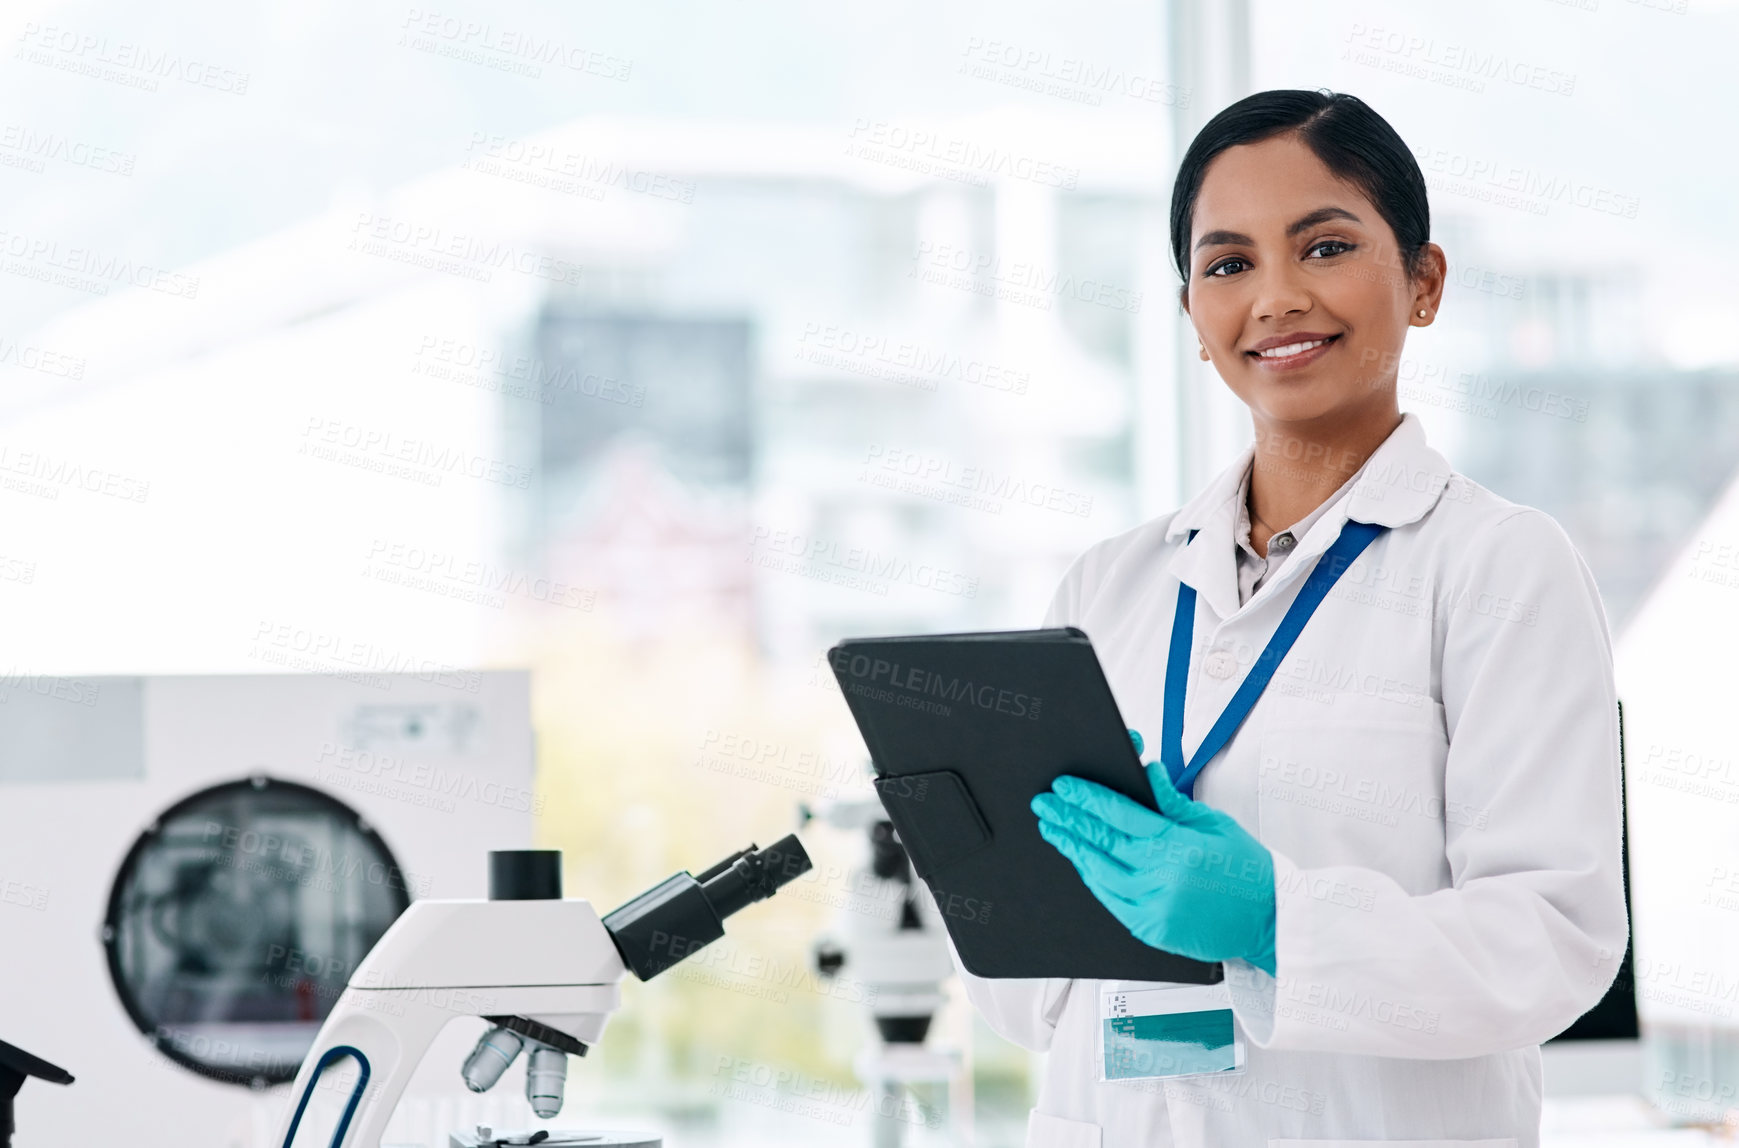 Buy stock photo Cropped portrait of an attractive young female scientist smiling while holding a digital tablet in a laboratory